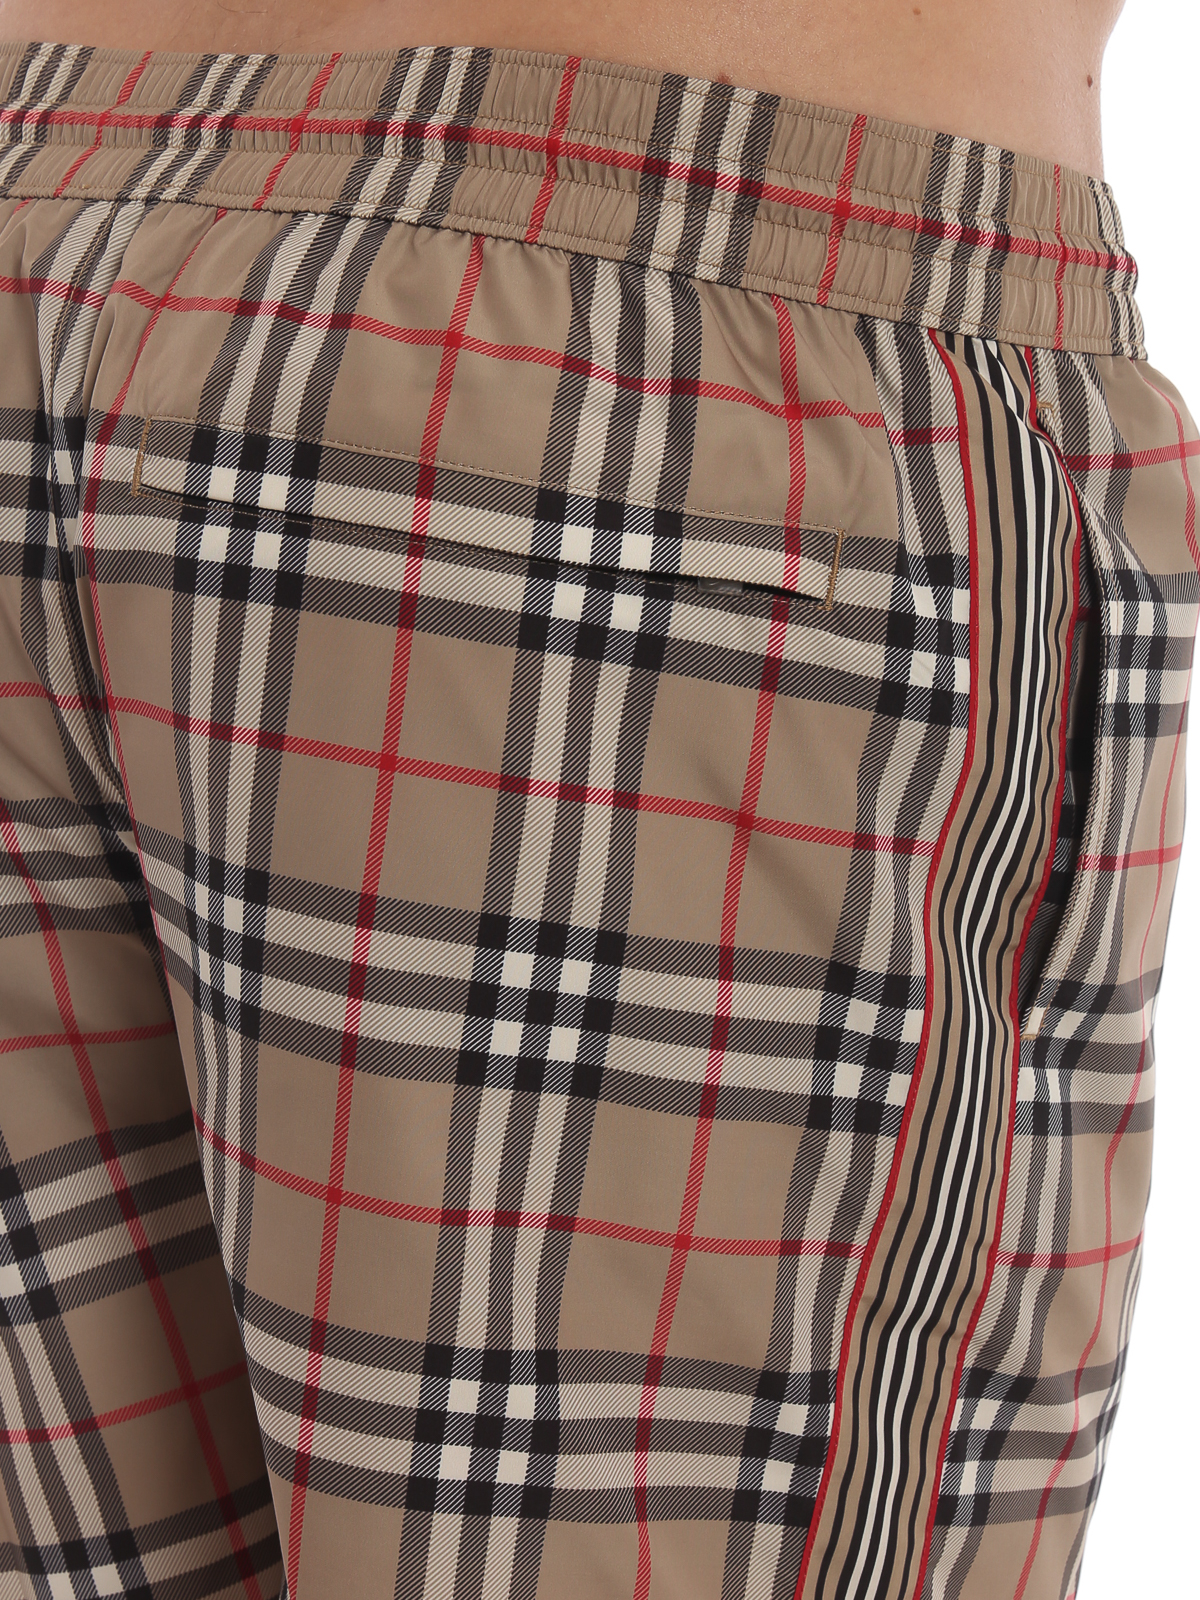 Guildes Vintage Check Swim Shorts in Beige - Burberry